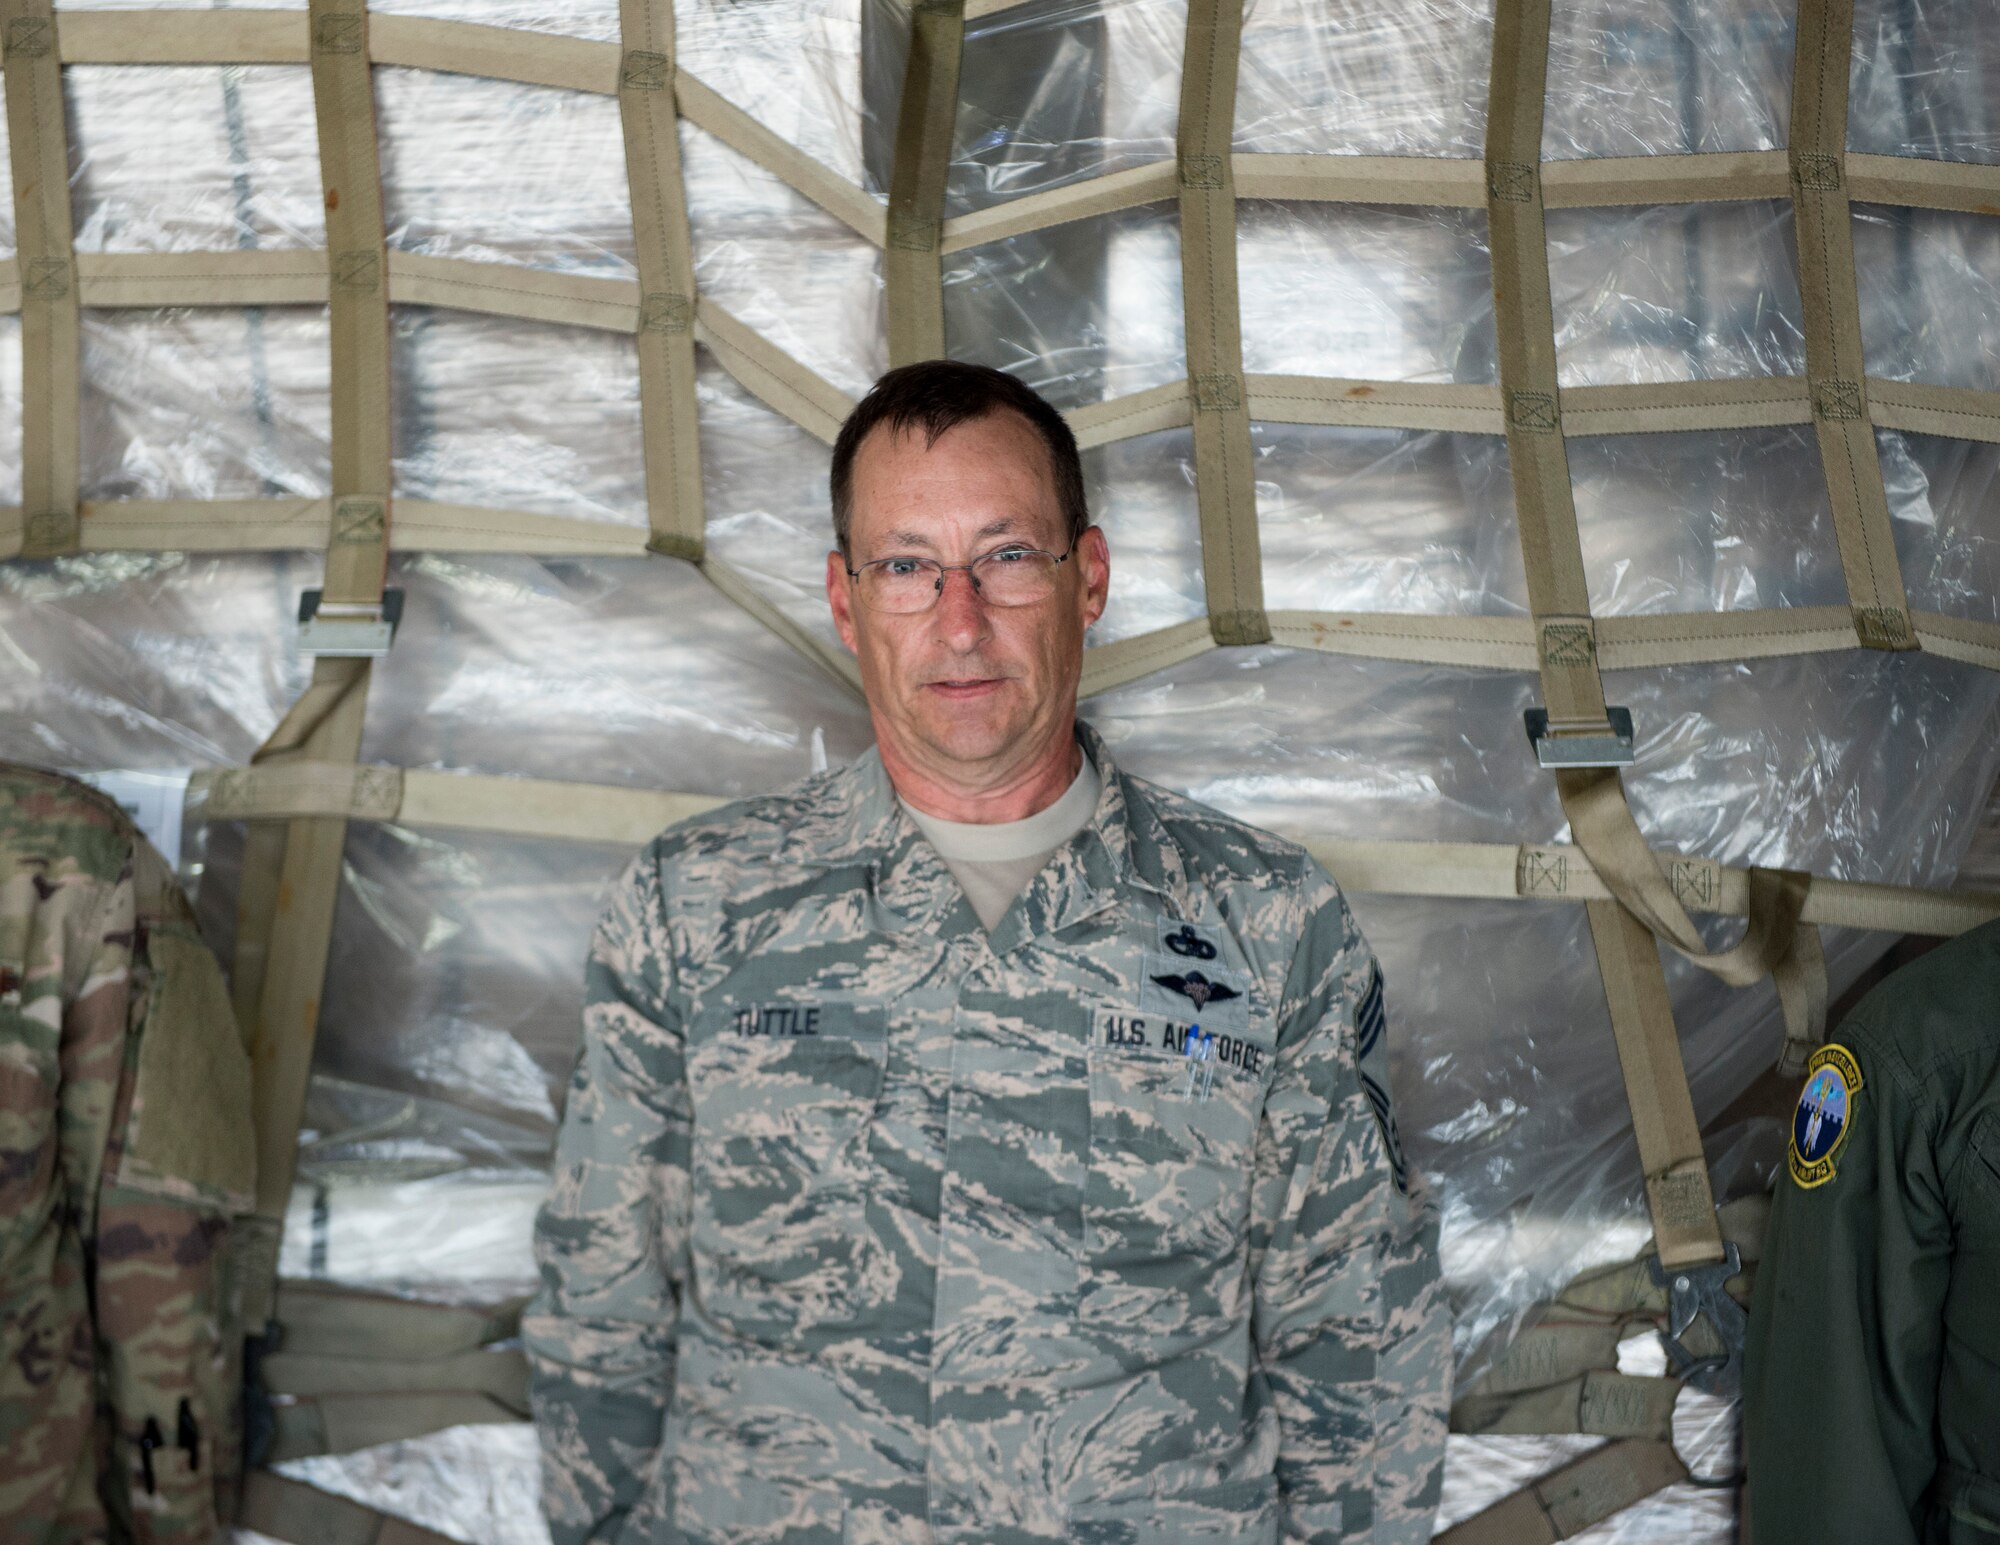 U.S. Air Force Chief Master Sgt. Steve Tuttle, 133rd Small Air Terminal, pushes a pallet onto the C-5 Galaxy in St. Paul, Minn., May 22, 2019.